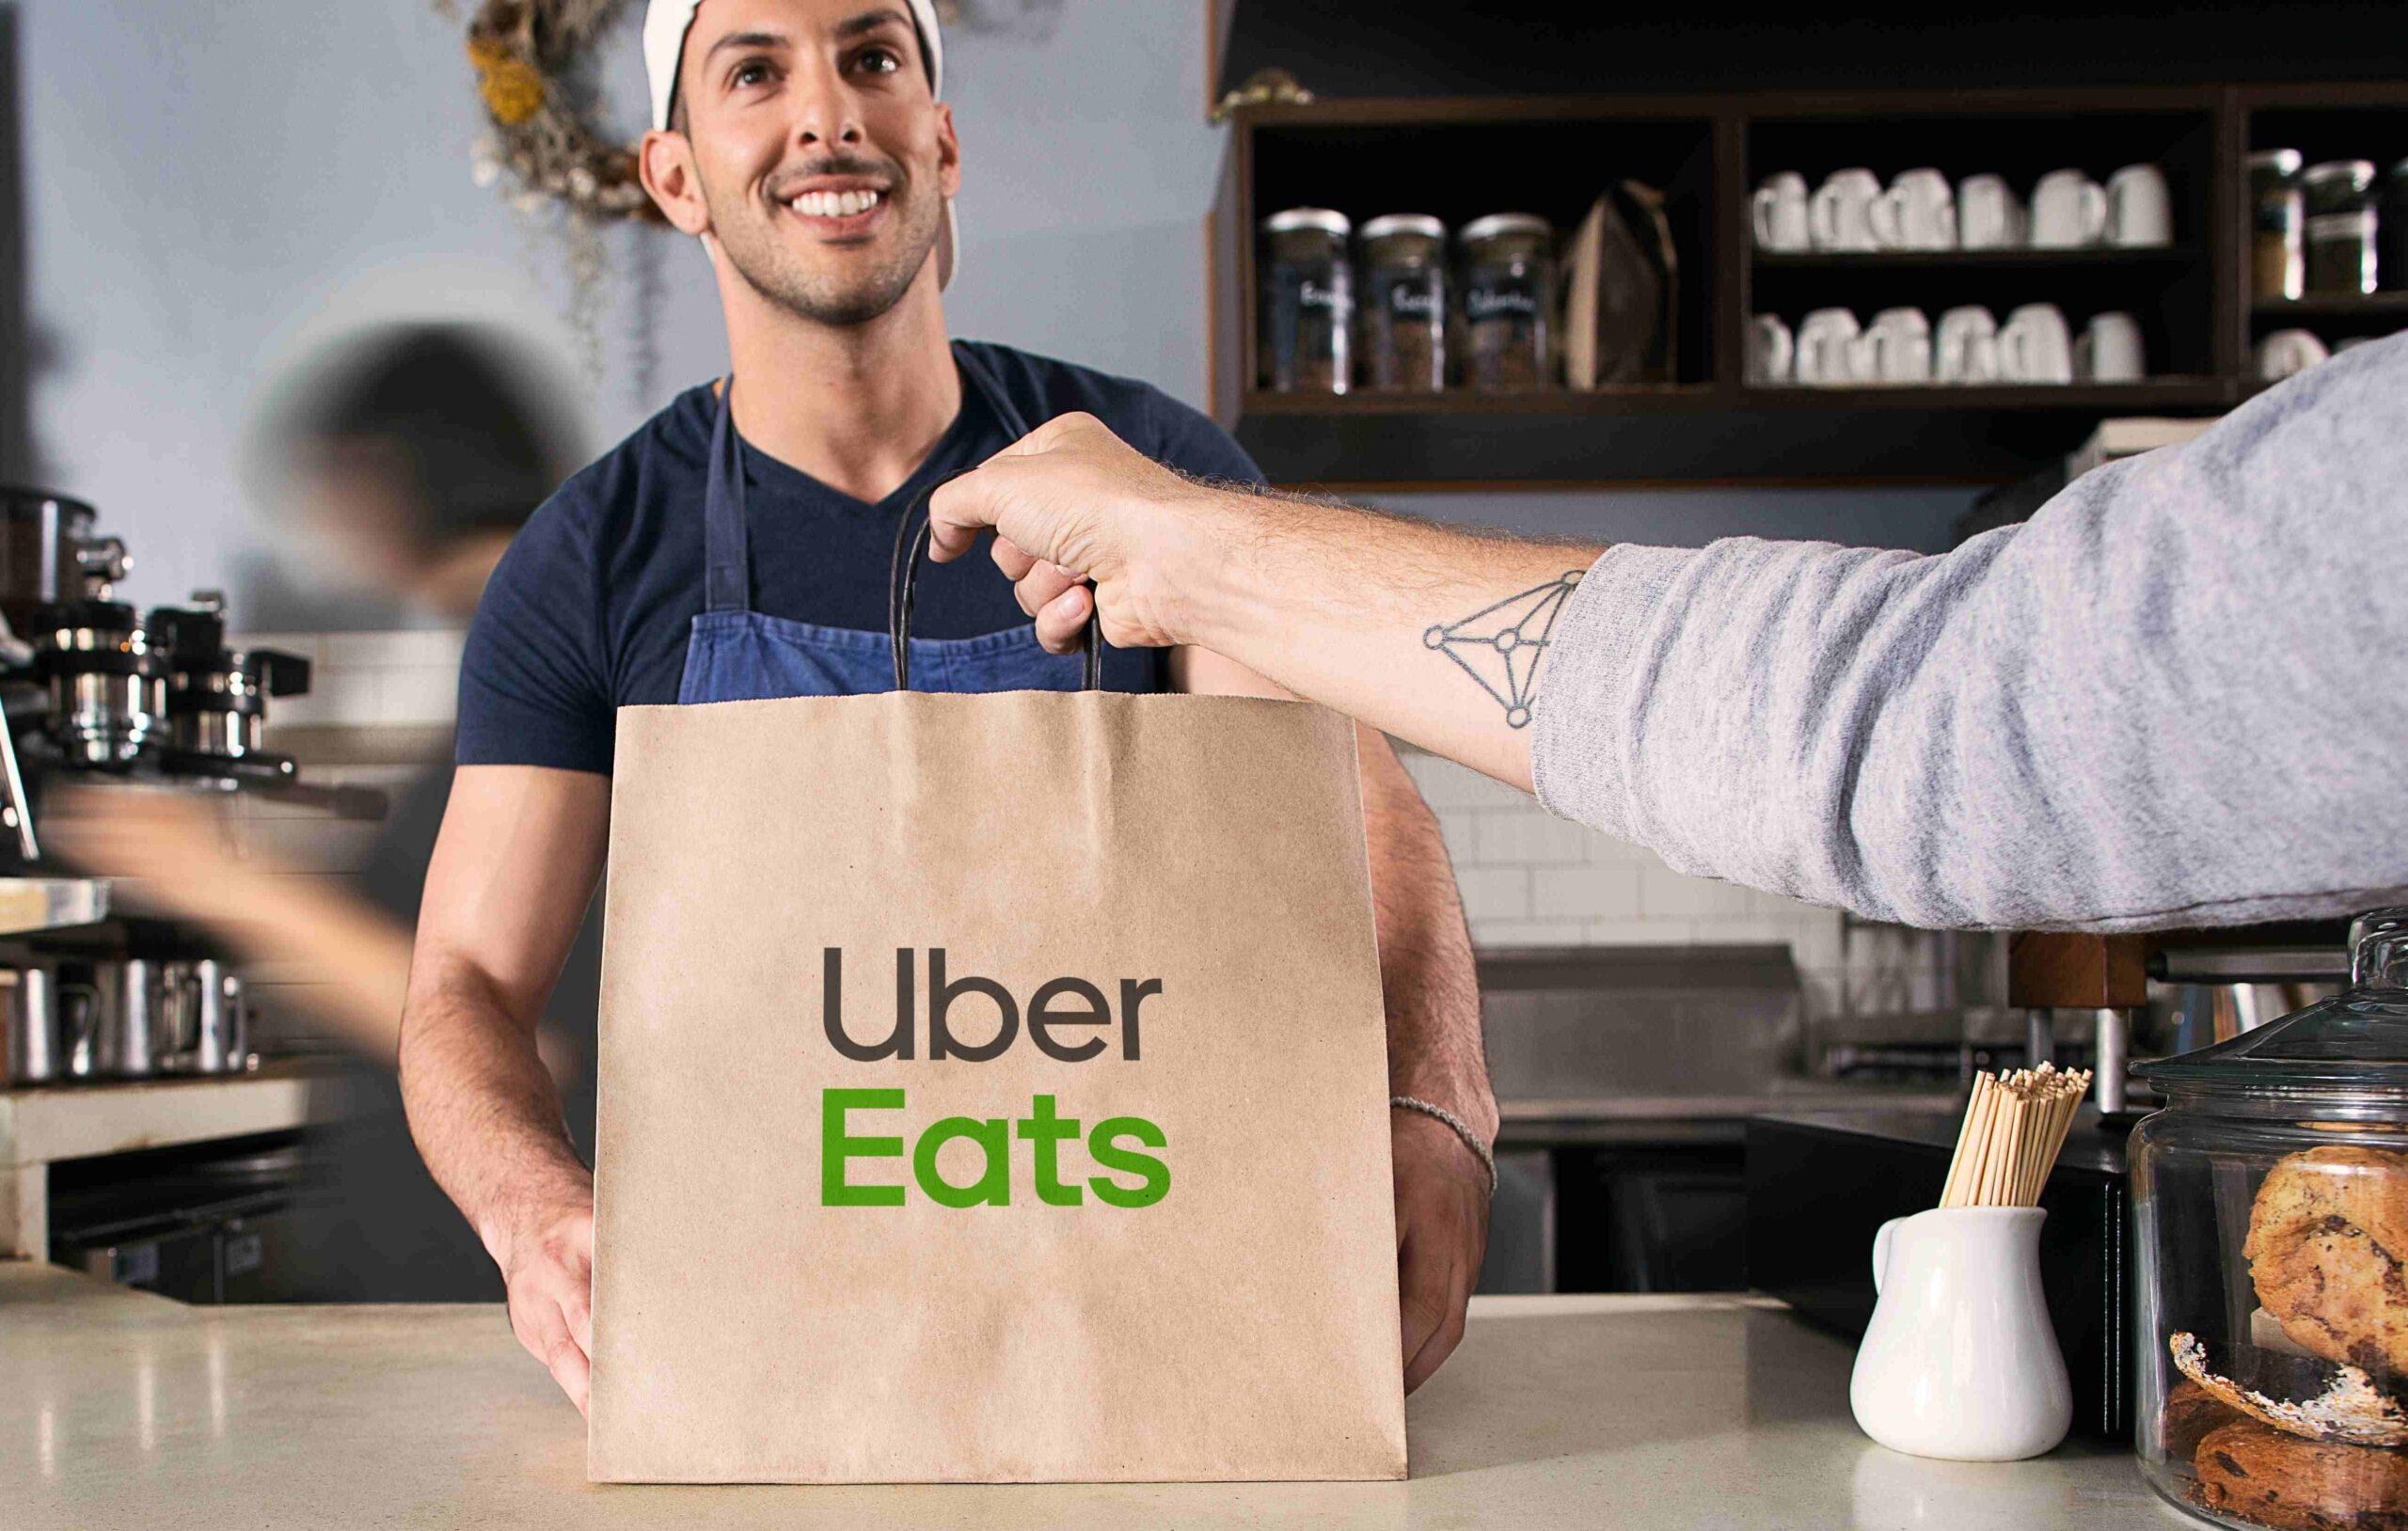 Uber Eats allows you to tip restaurants in the app.